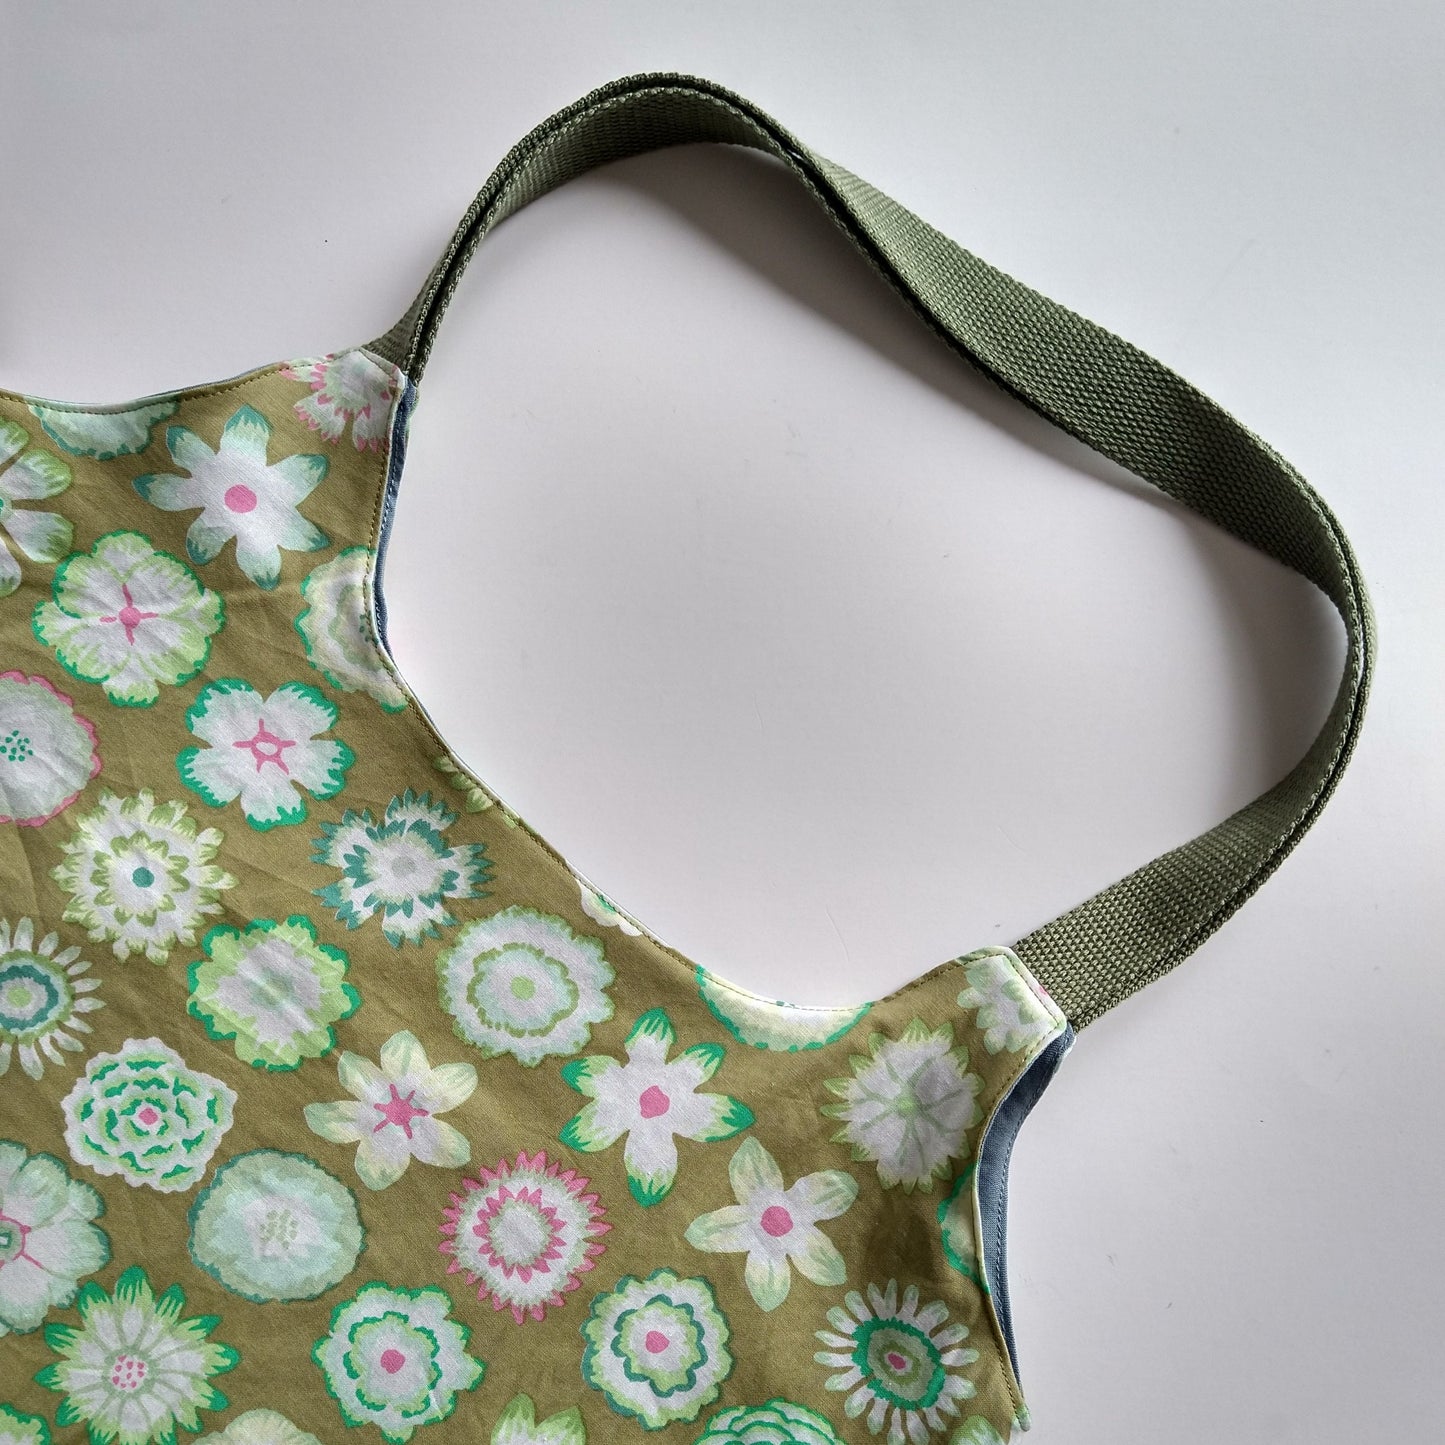 Shopping bag, reversible, size small, green flowers (Handmade in Canada)